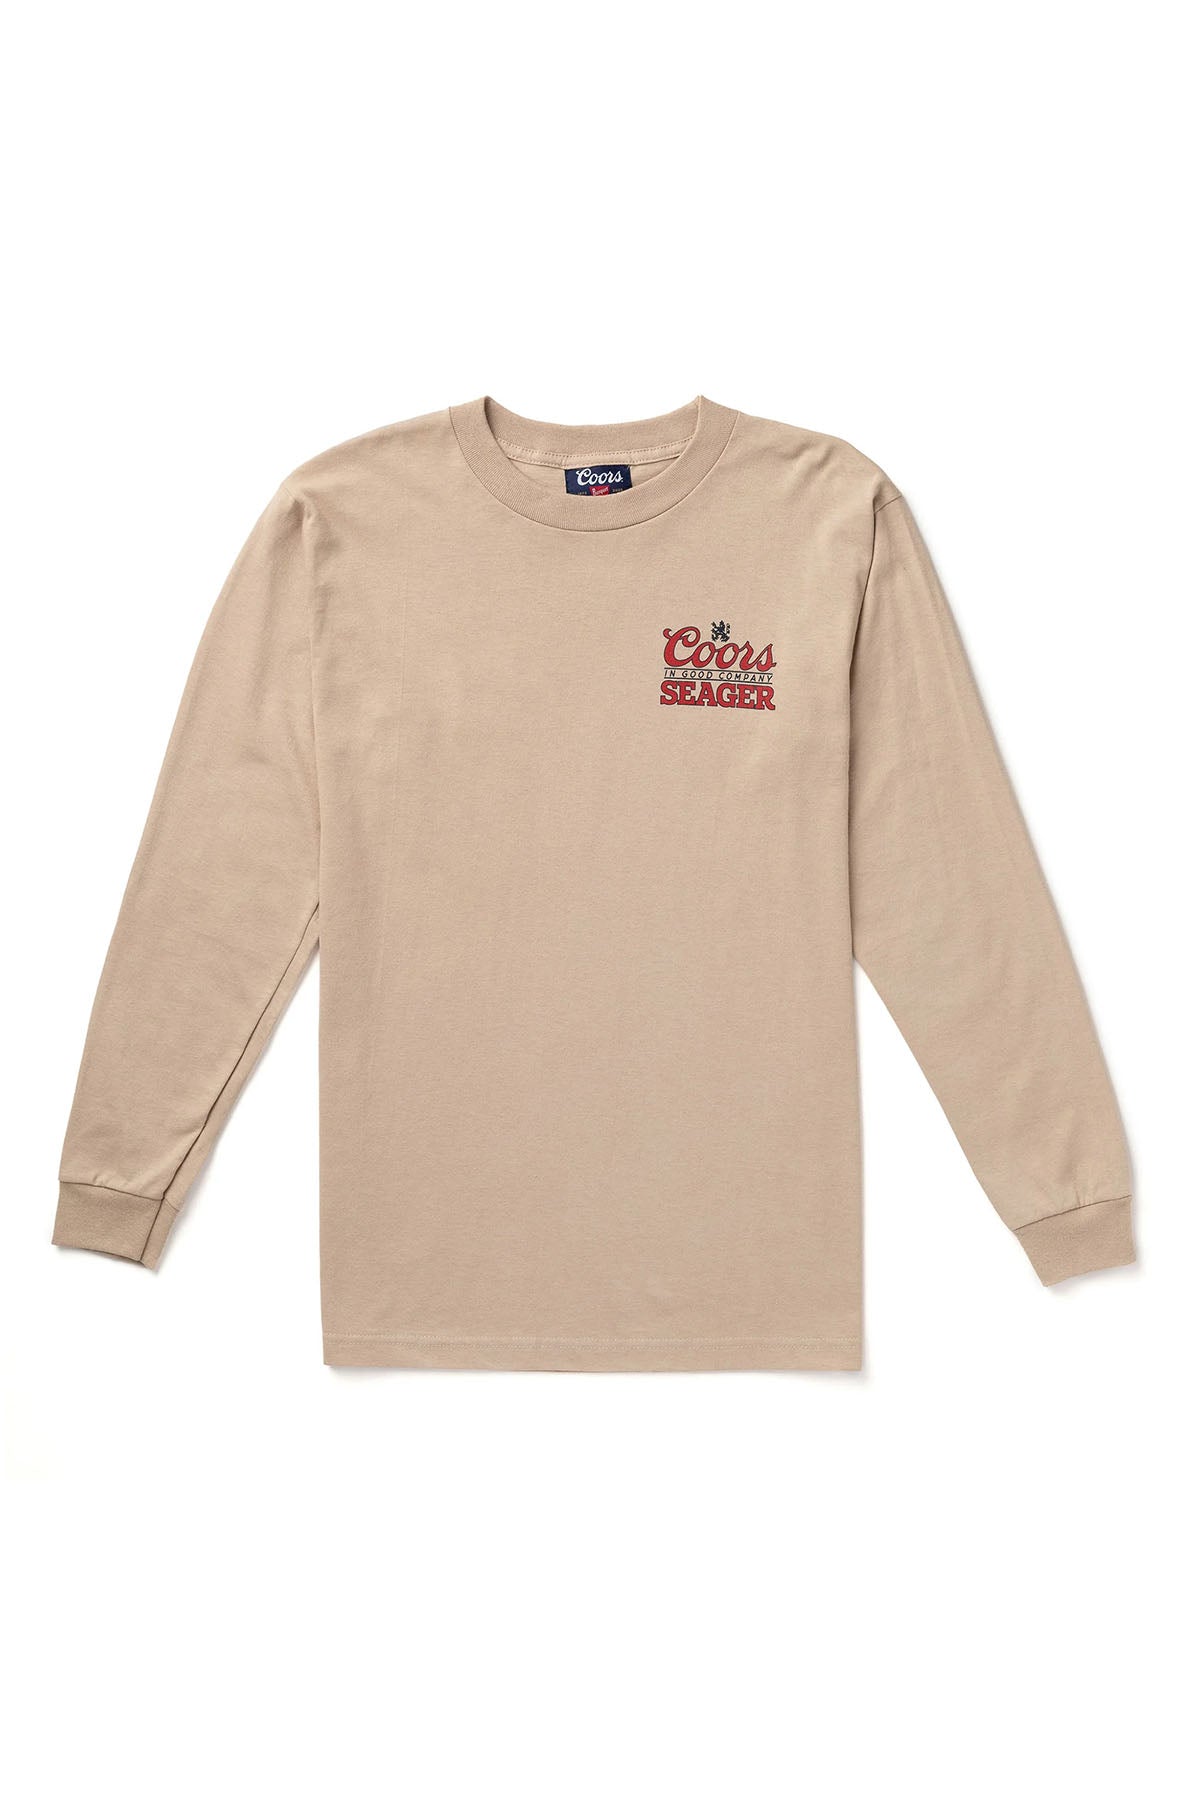 Seager - Coors LS Tee - Sand - Front